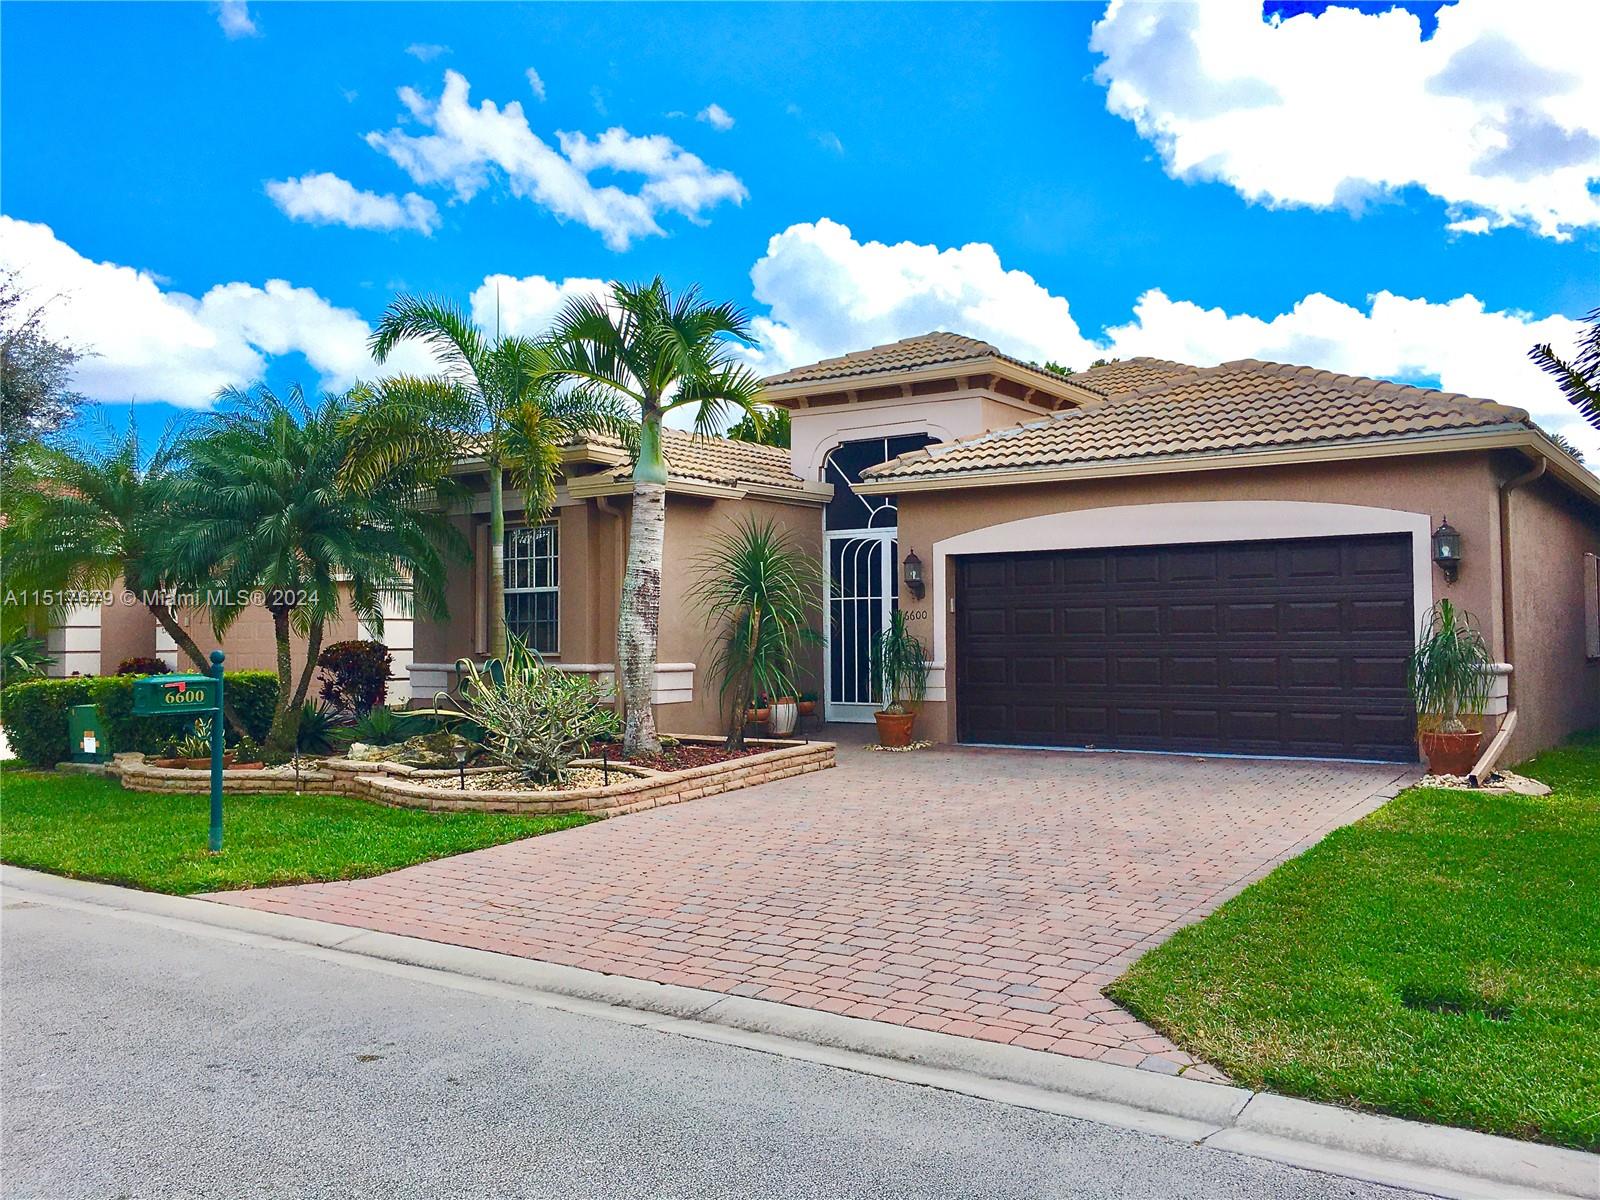 6600 Pisano Dr, Lake Worth, Palm Beach County, Florida - 3 Bedrooms  
3 Bathrooms - 